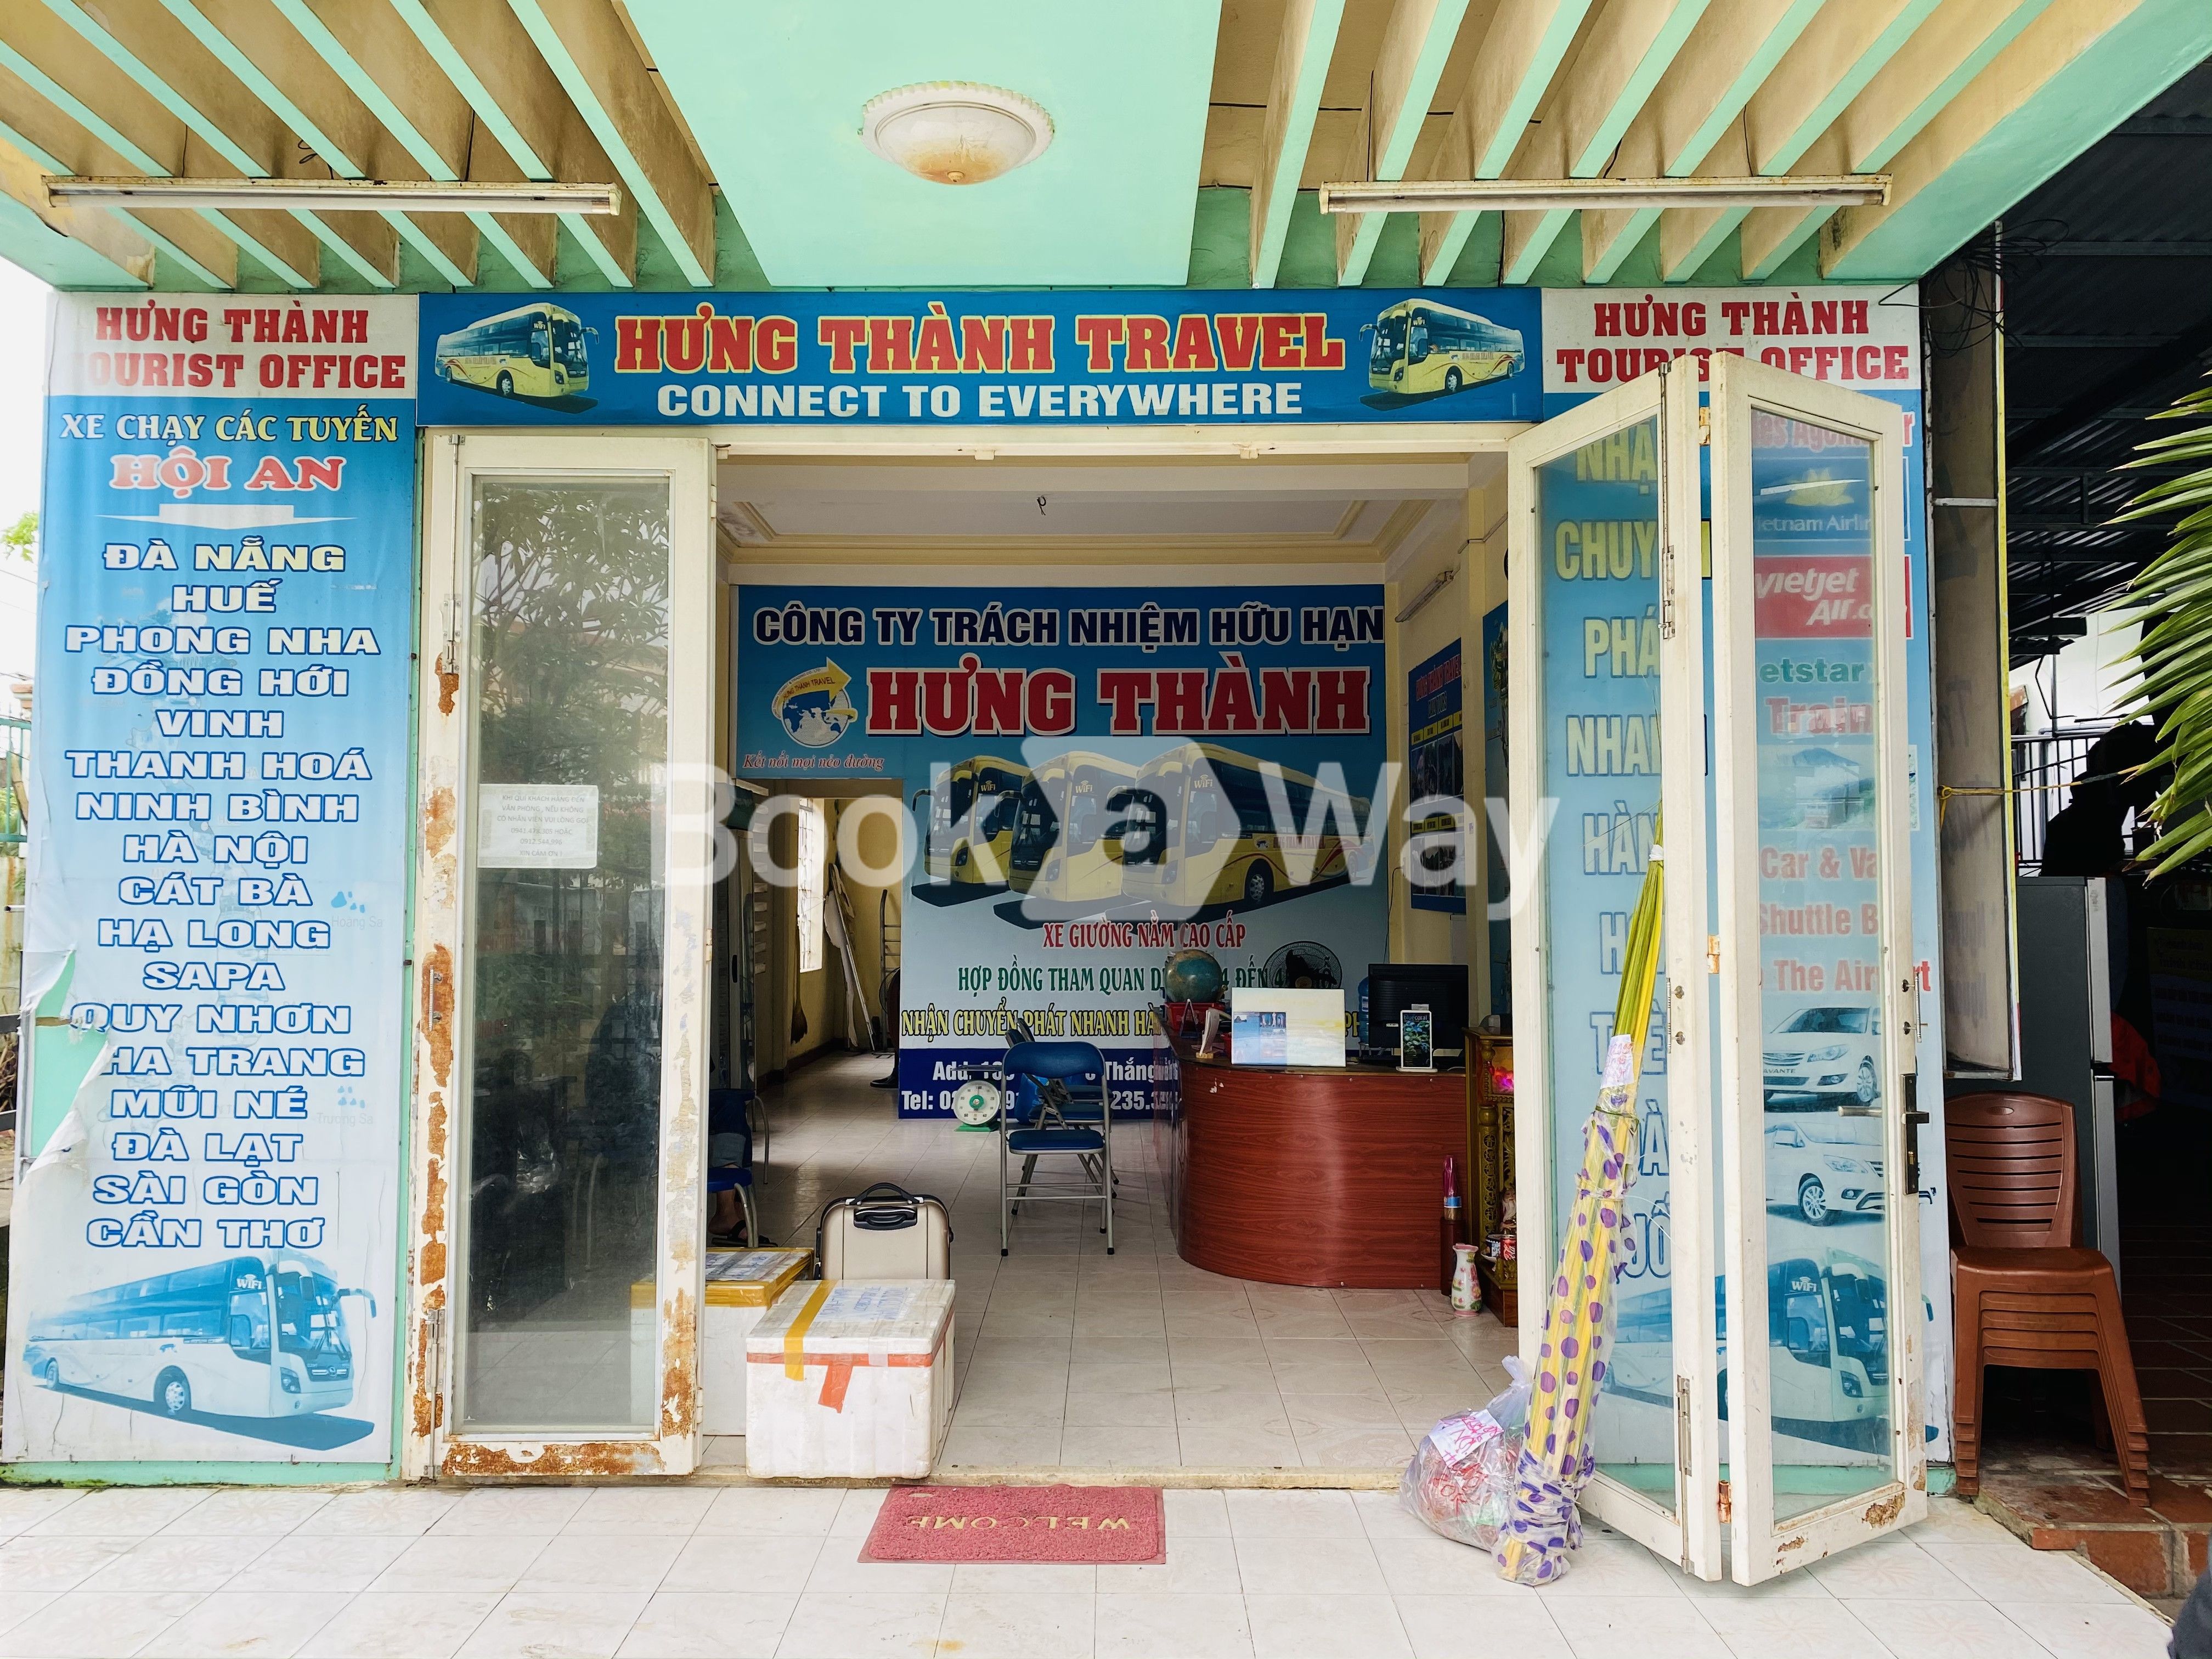 Hung Thanh Travel office